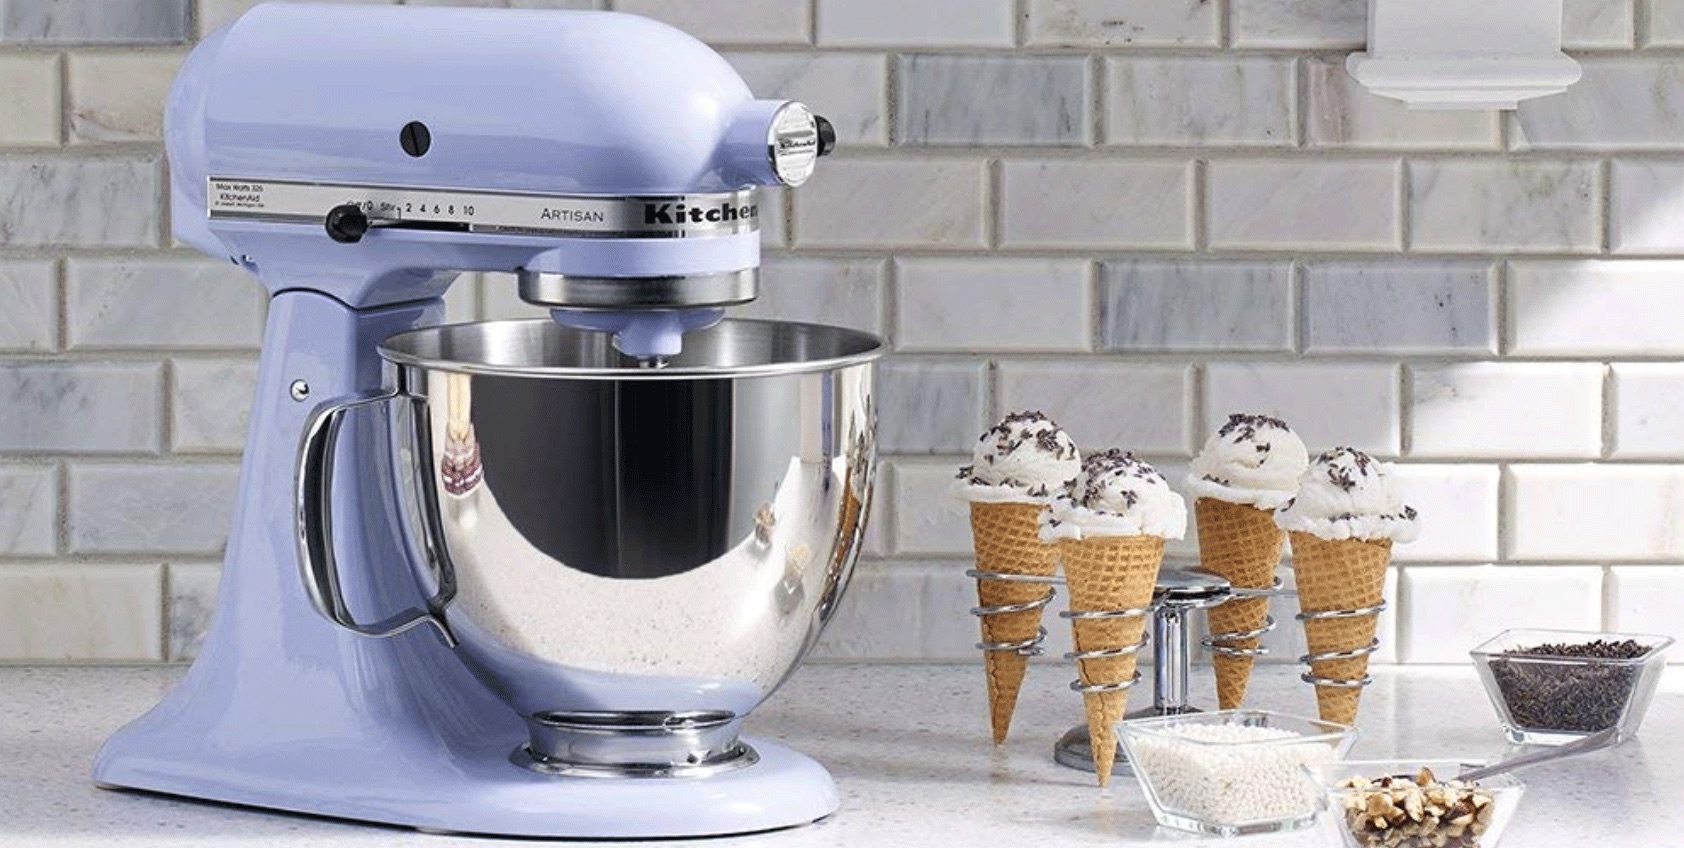 How To Know Which Kitchenaid Mixer I Have